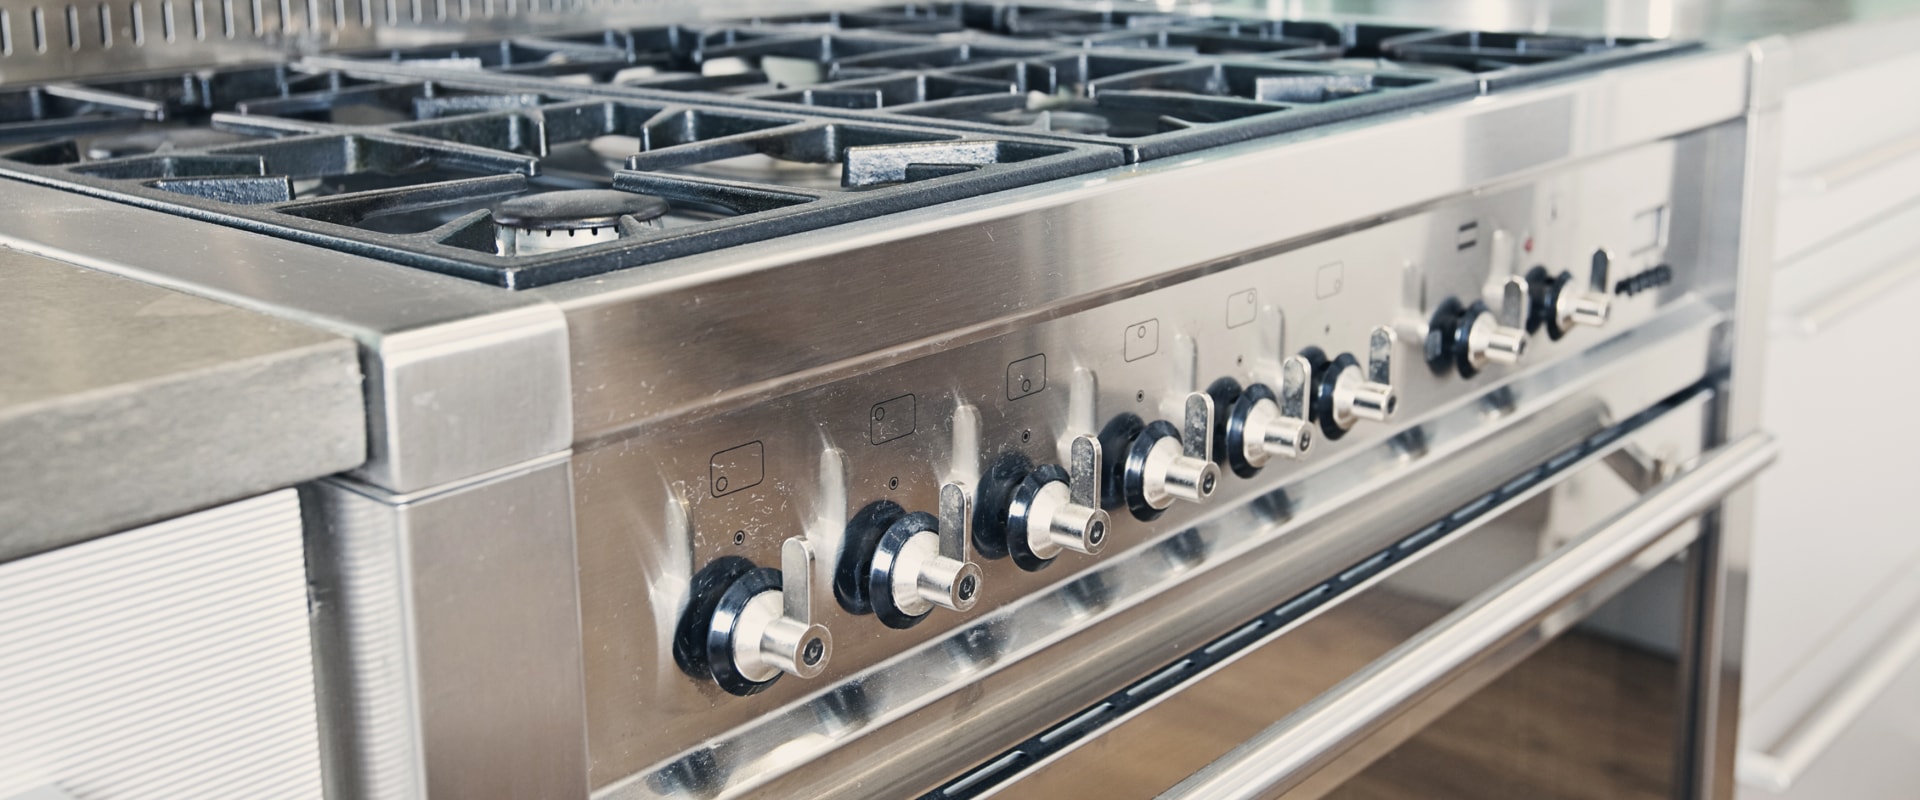 How can i increase appliance sales?